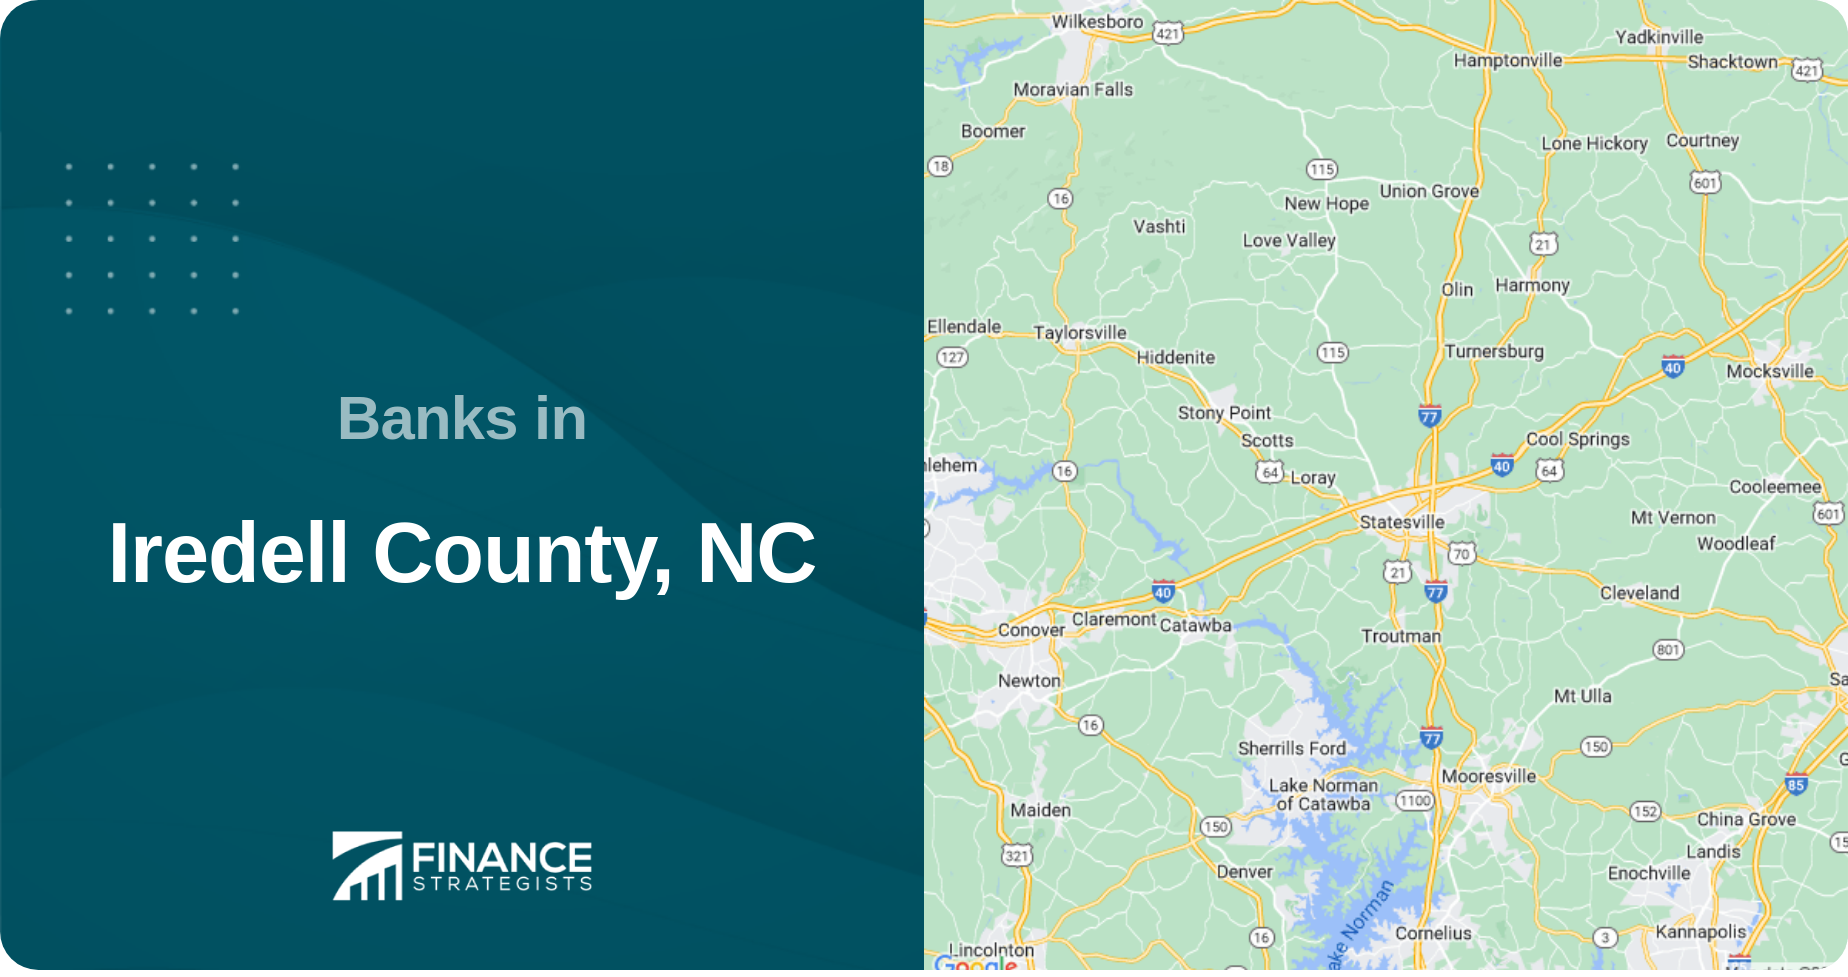 Banks in Iredell County, NC